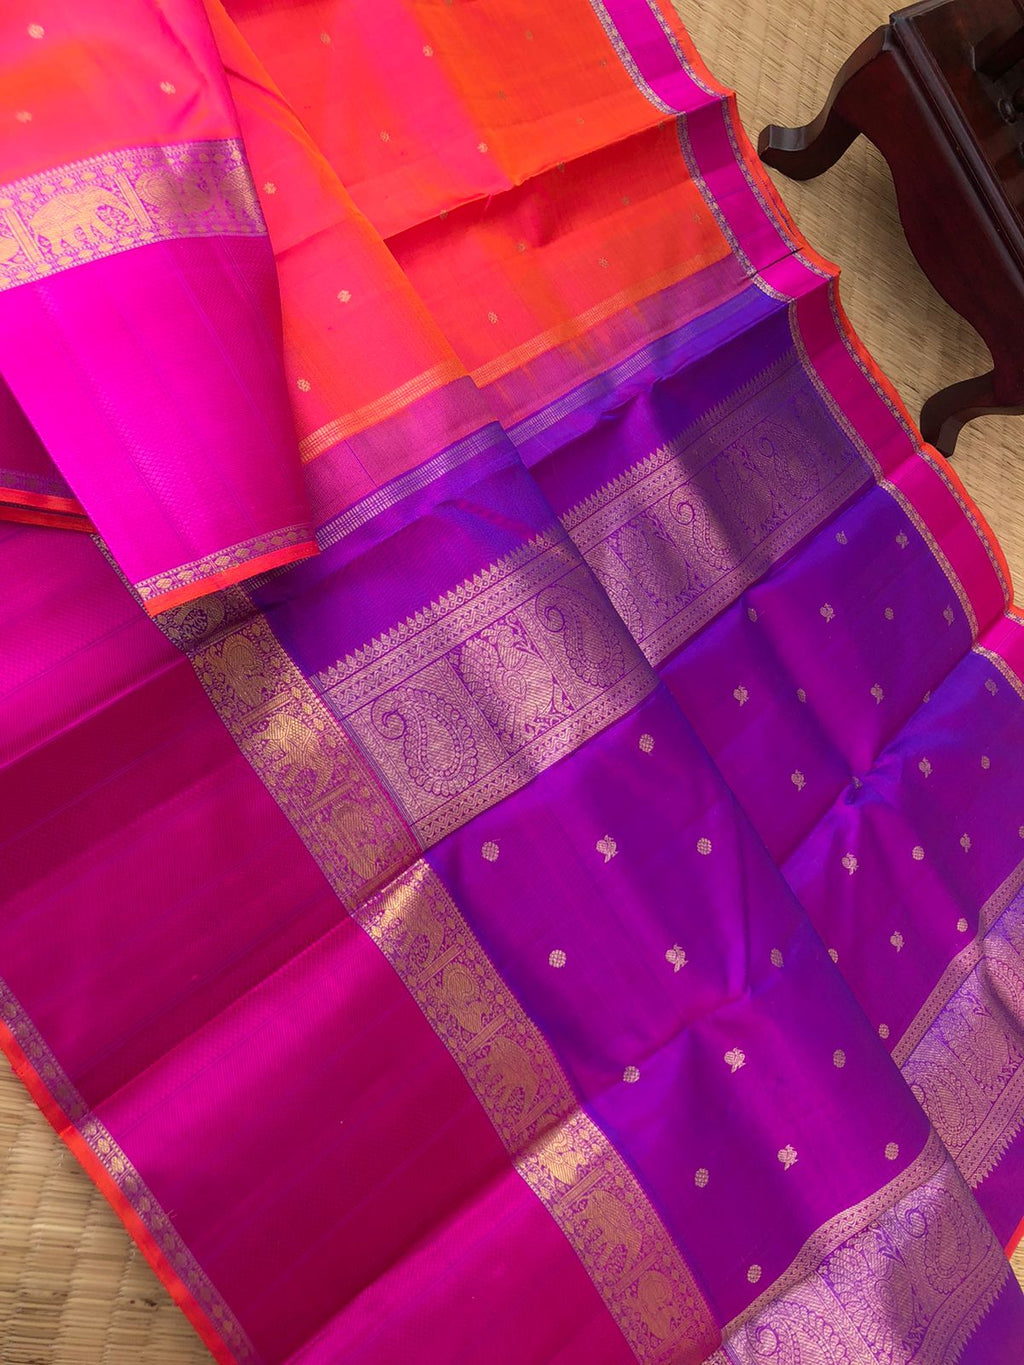 Swarnam - The lineage of Authentic Kanchivaram - a most beautiful short pink rani pink and short purple pallu woven with buttas